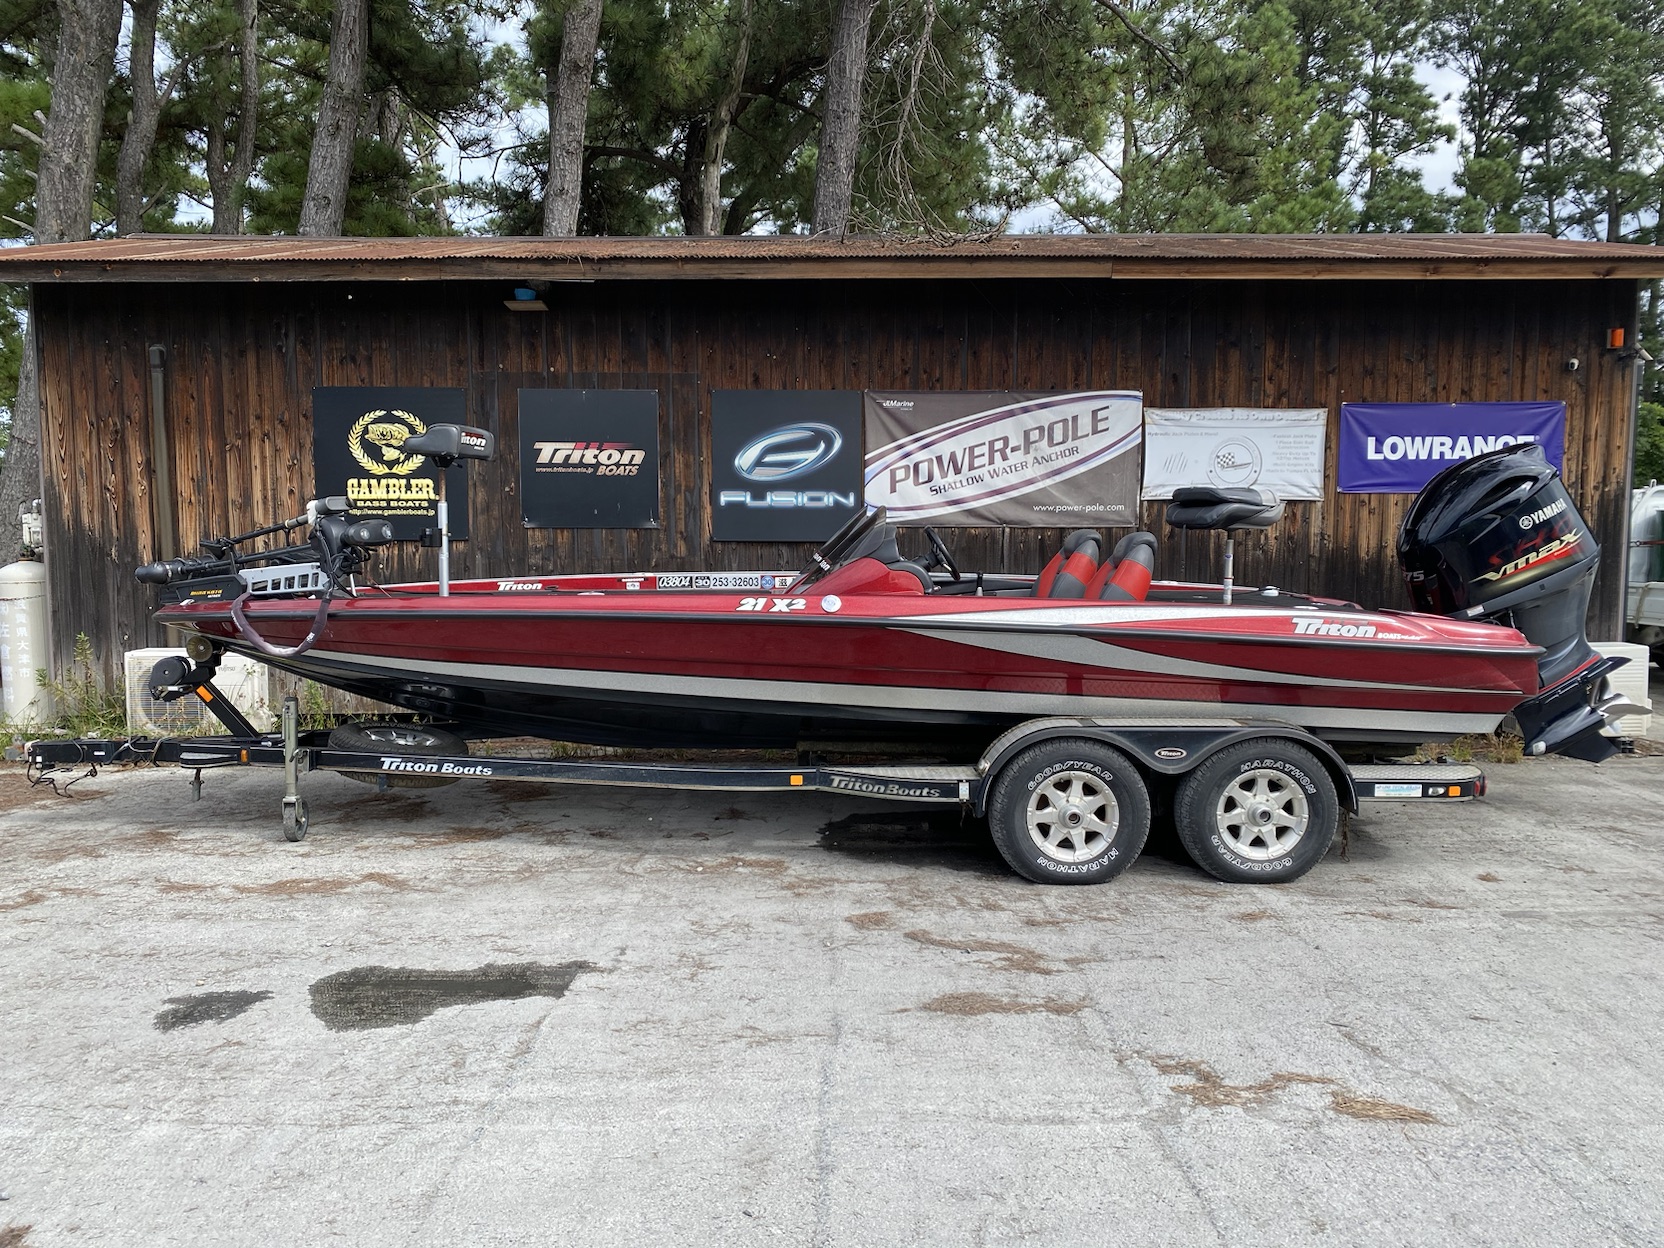 PRICE DOEN !!2023年末まで保管料サービス　‘08 Triton Boats 21X2 with SHO275